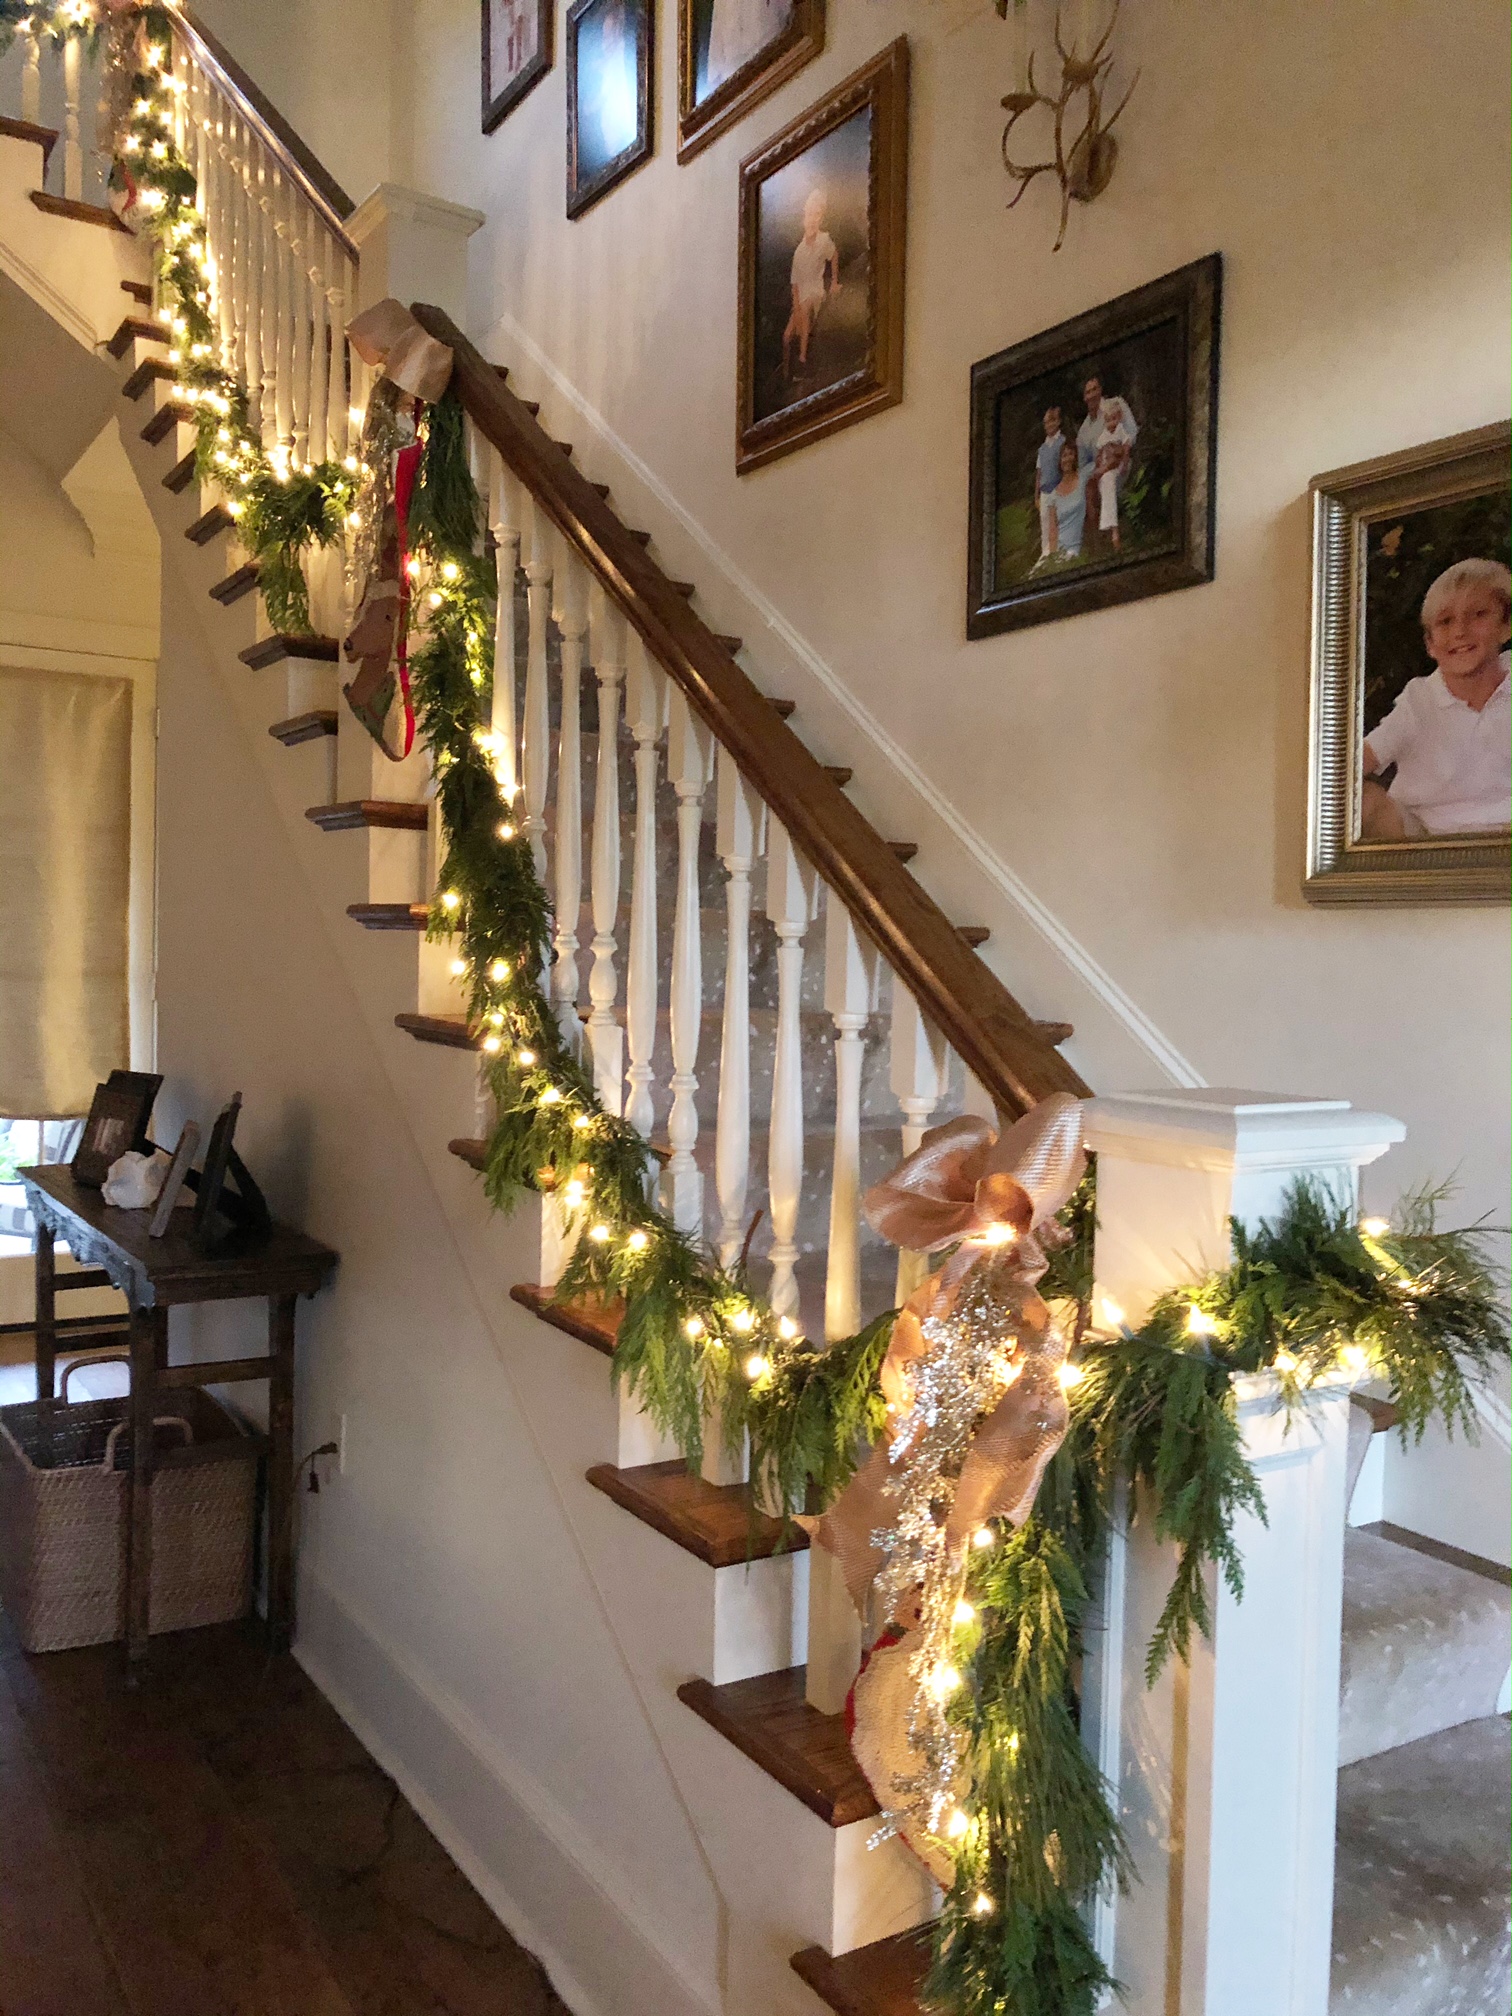 The Uptown Acorn: It's Christmas Time {Chateau Lapeyre}